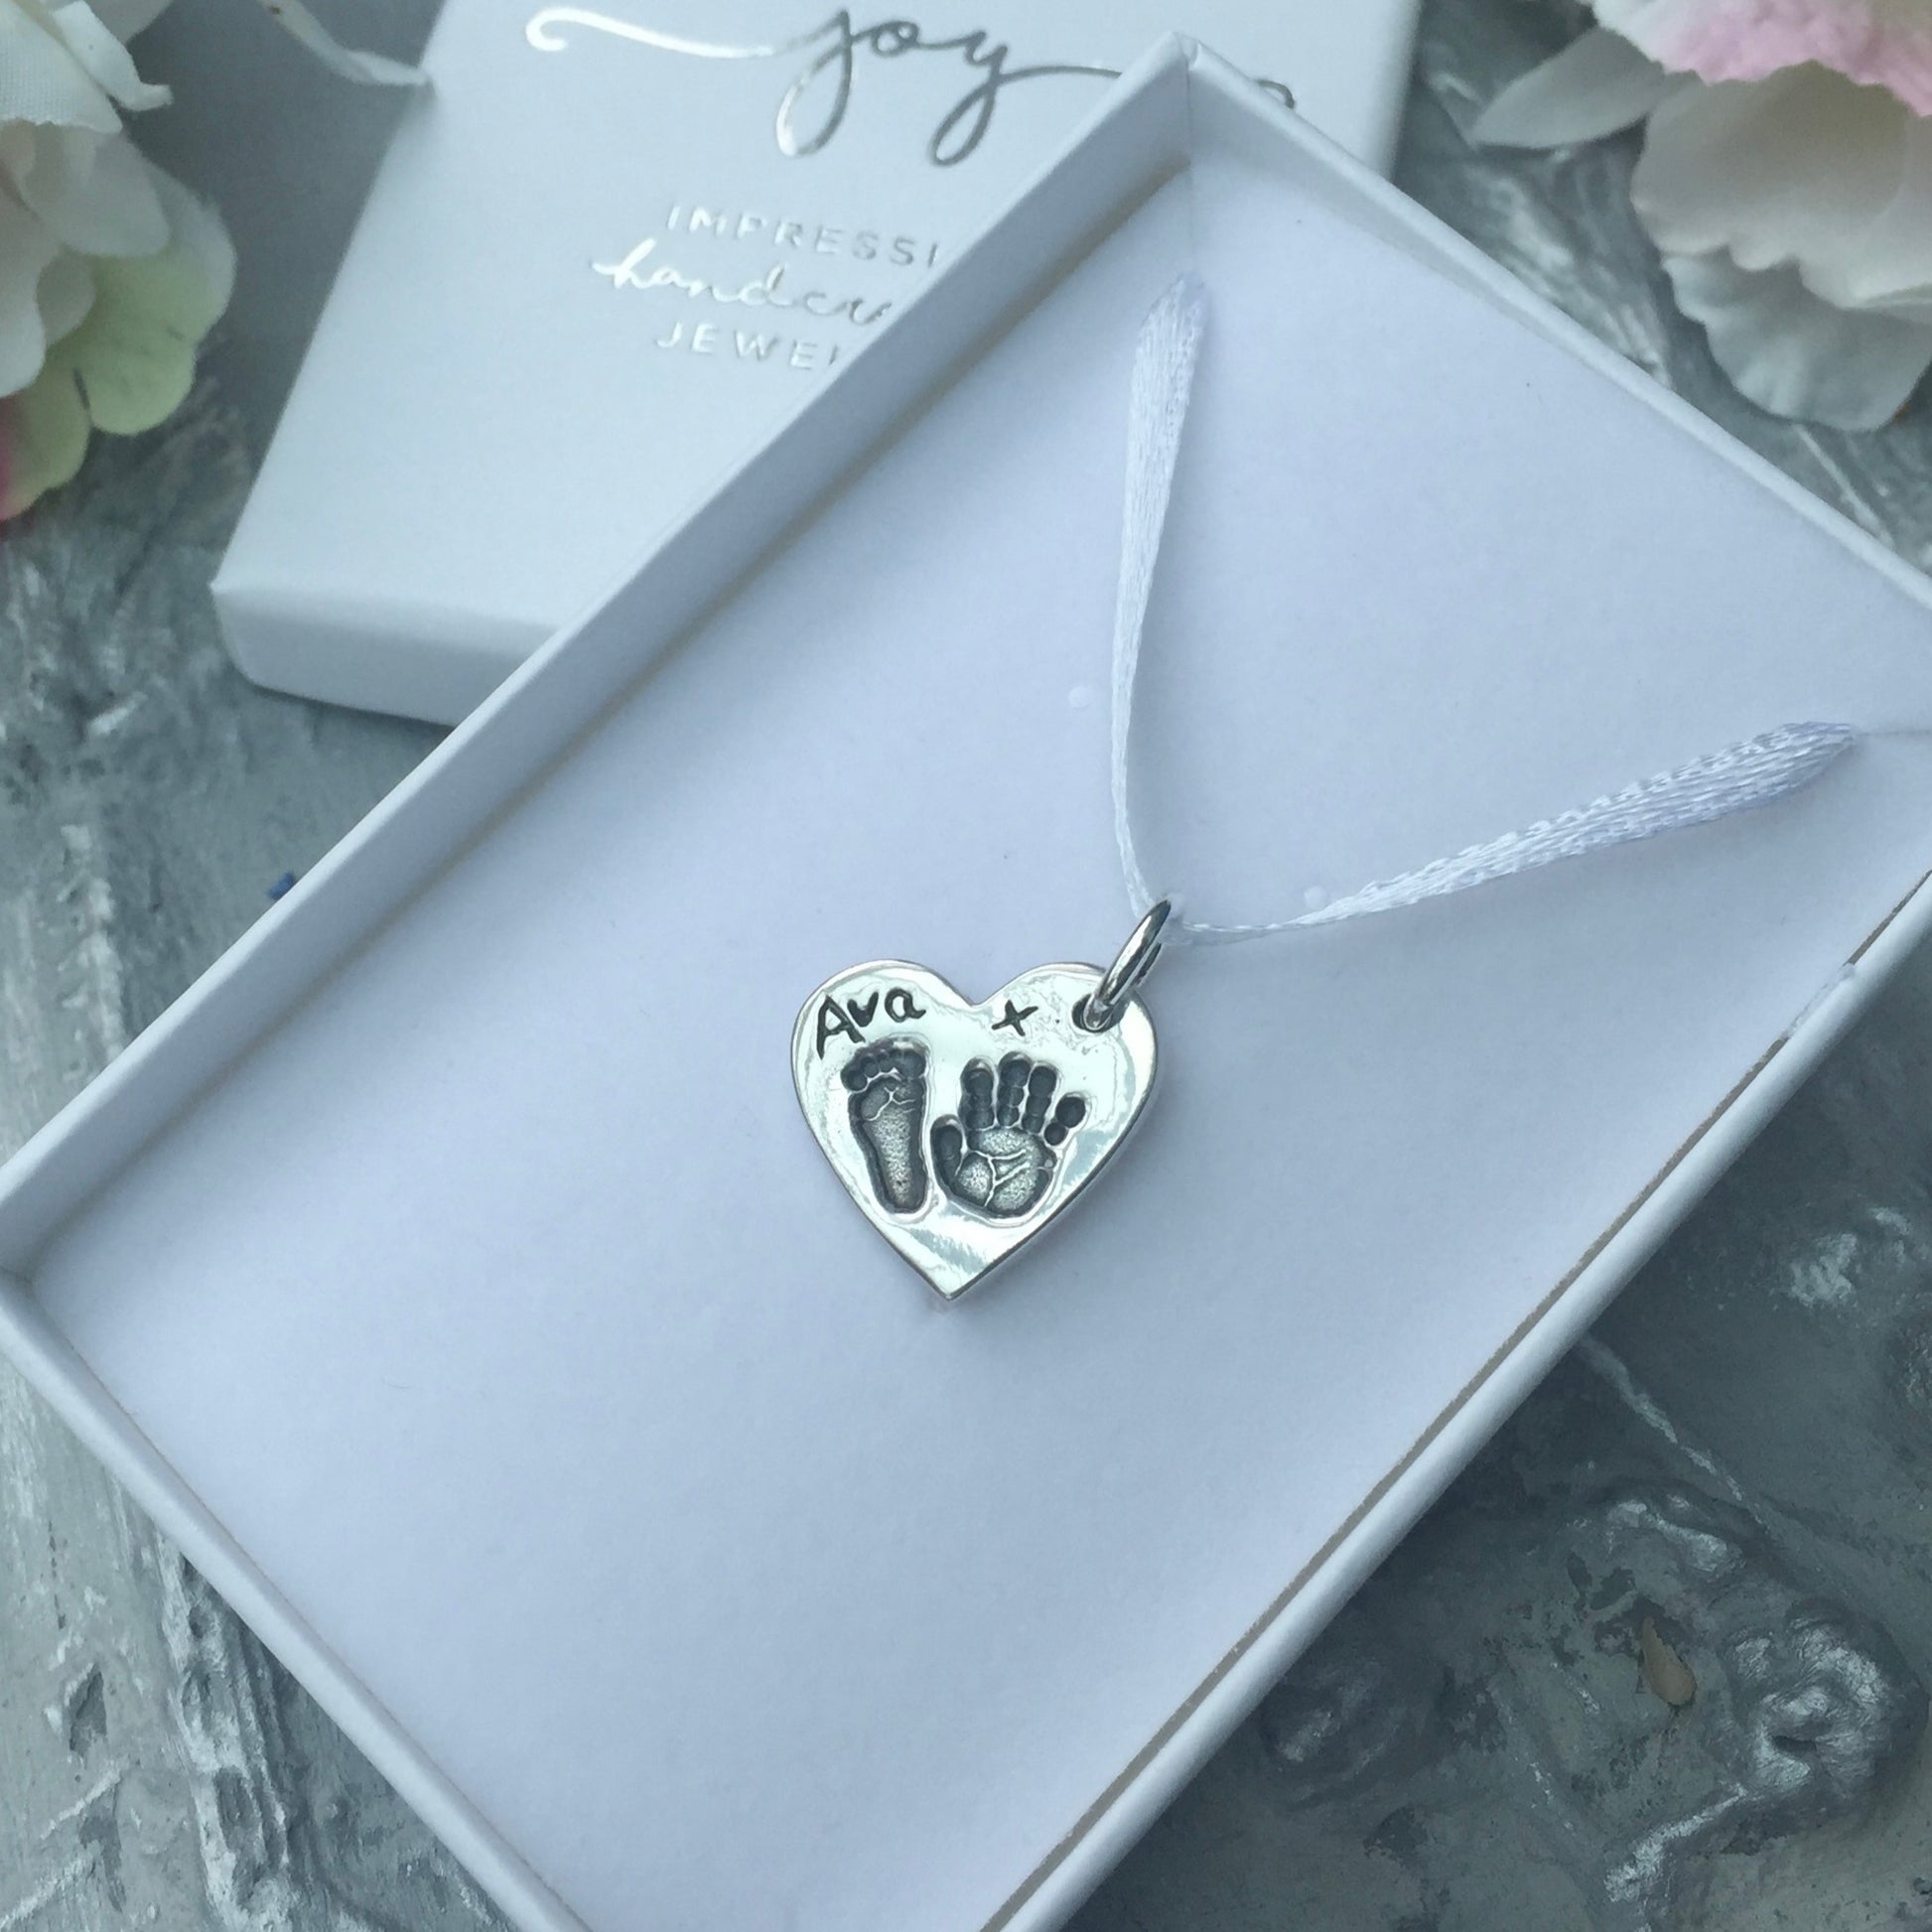 HAND AND FOOTPRINT CHARM WITH NAME AND KISS ON FRONT BY JOY IMPRESSIONS